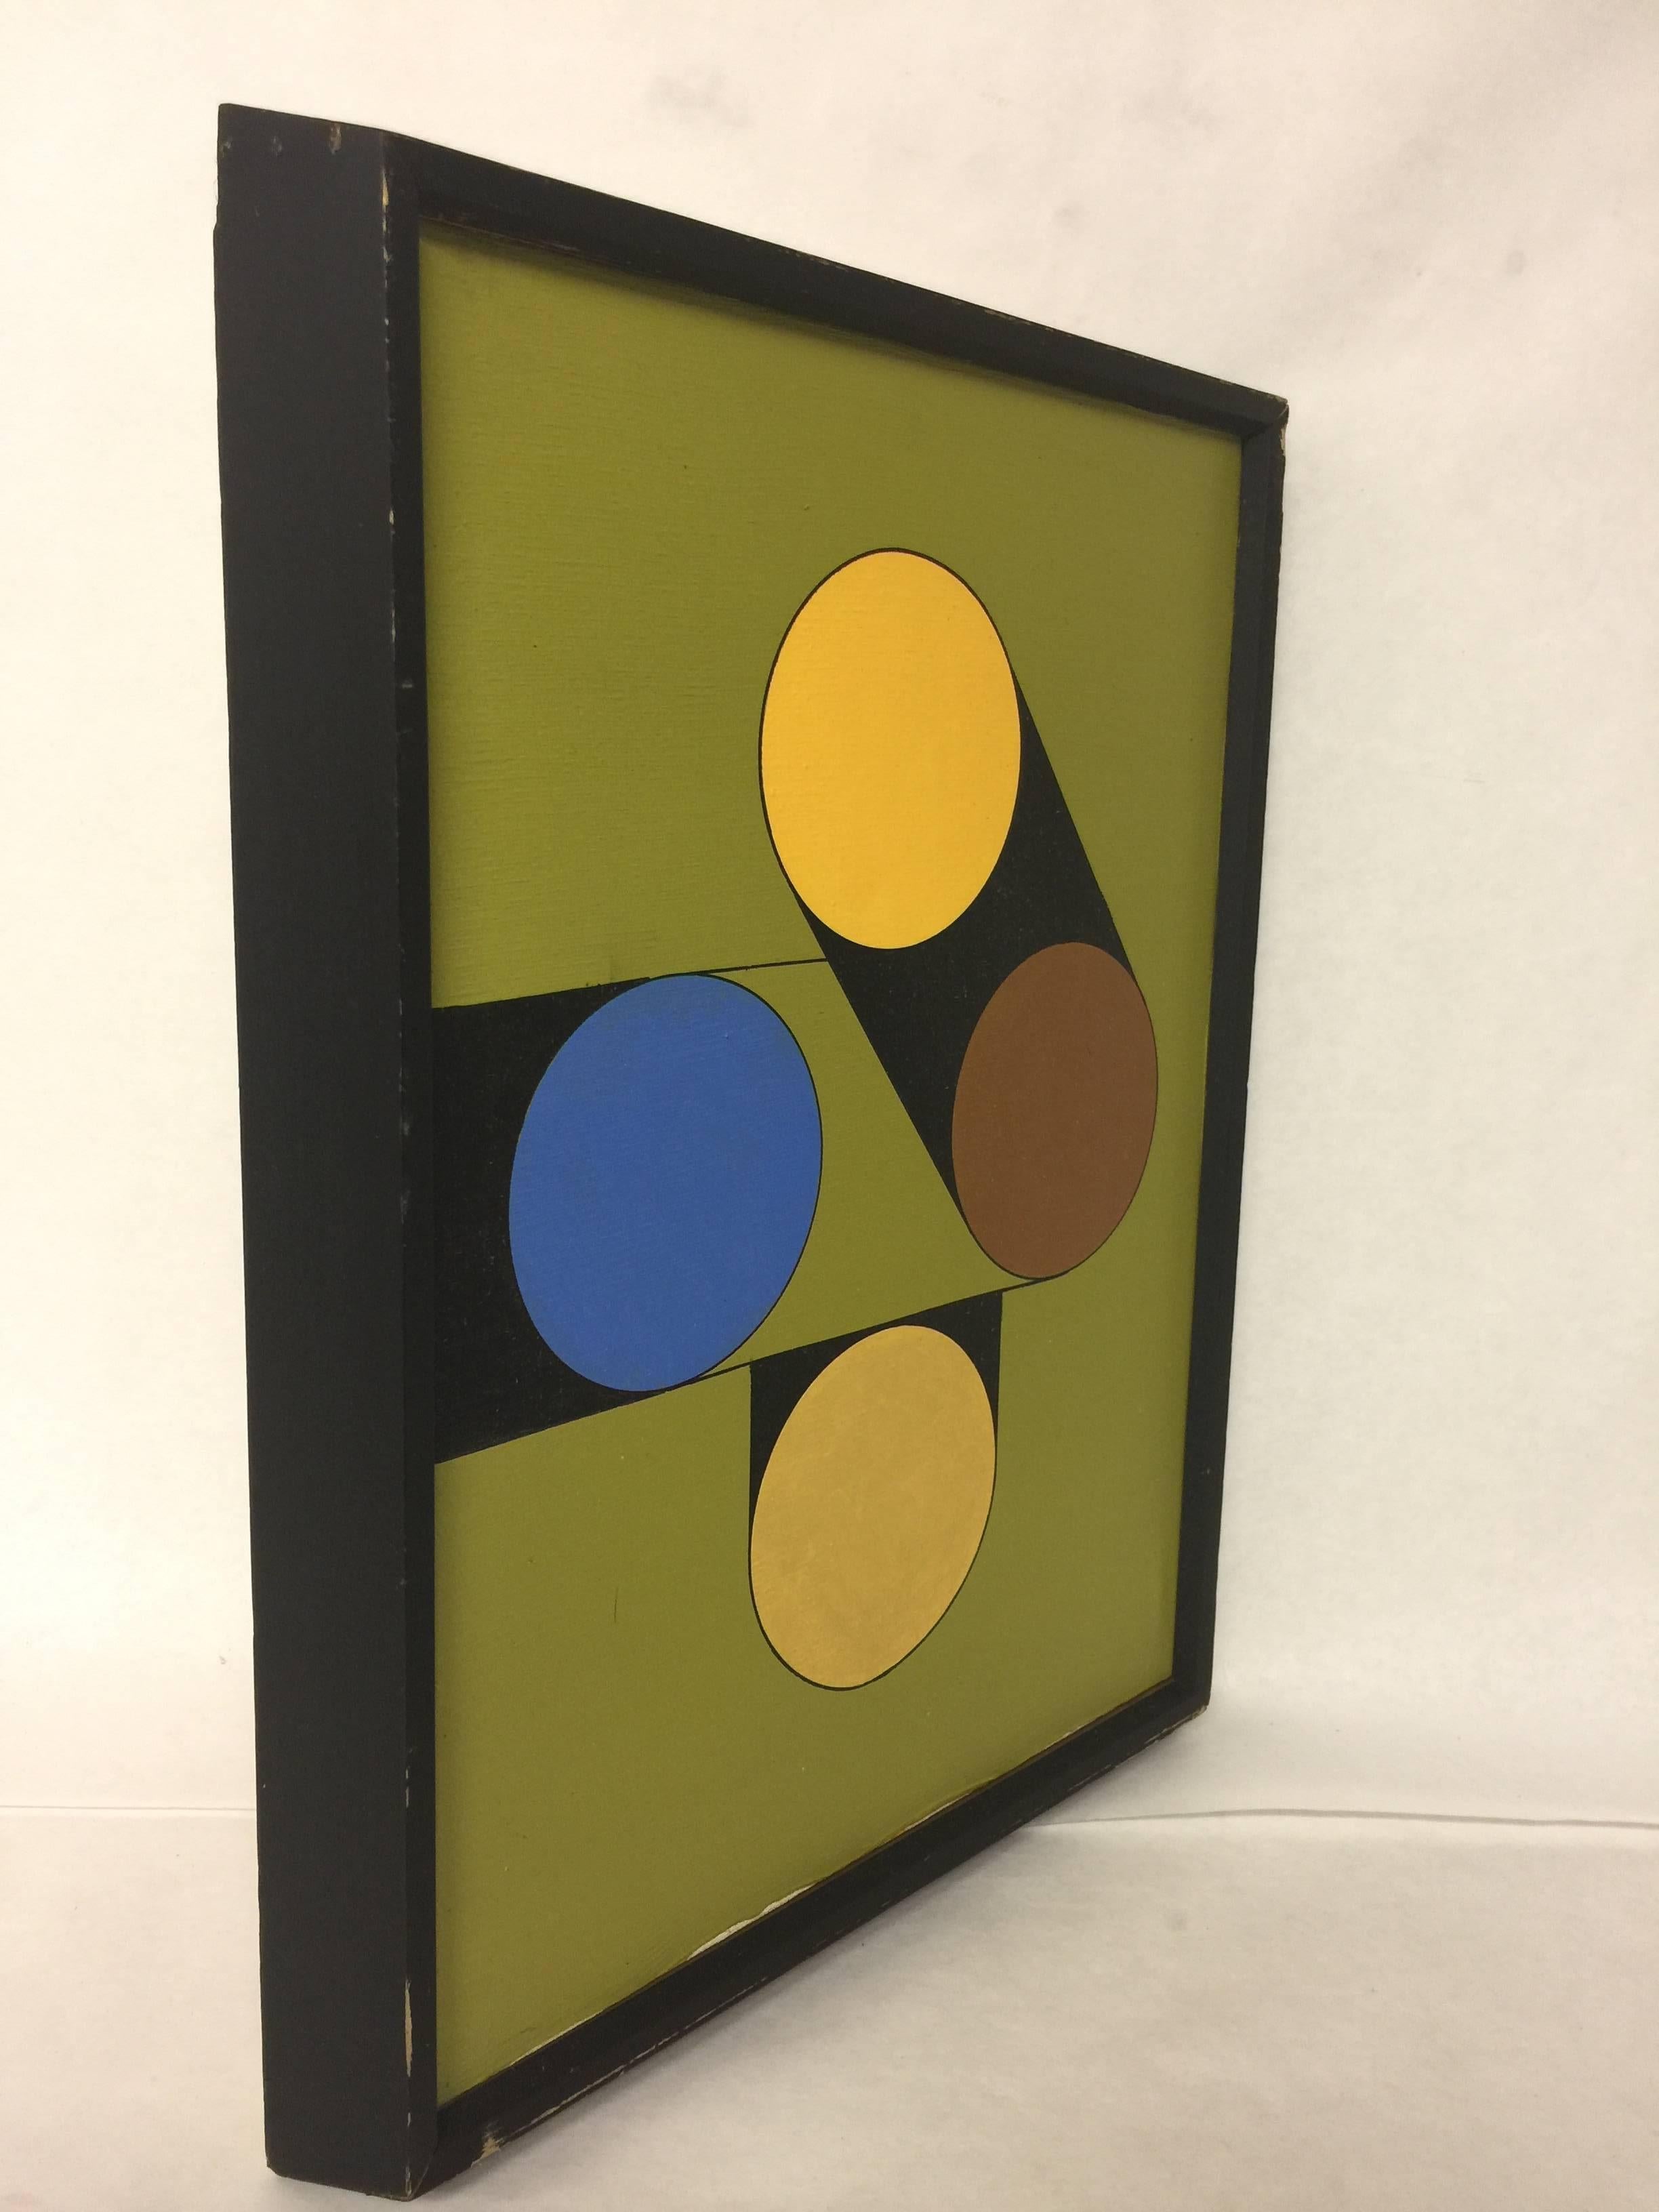 Vintage circa 1980s Hard Edge Geometric Abstract Oil on Canvas Painting 1 of 5 1